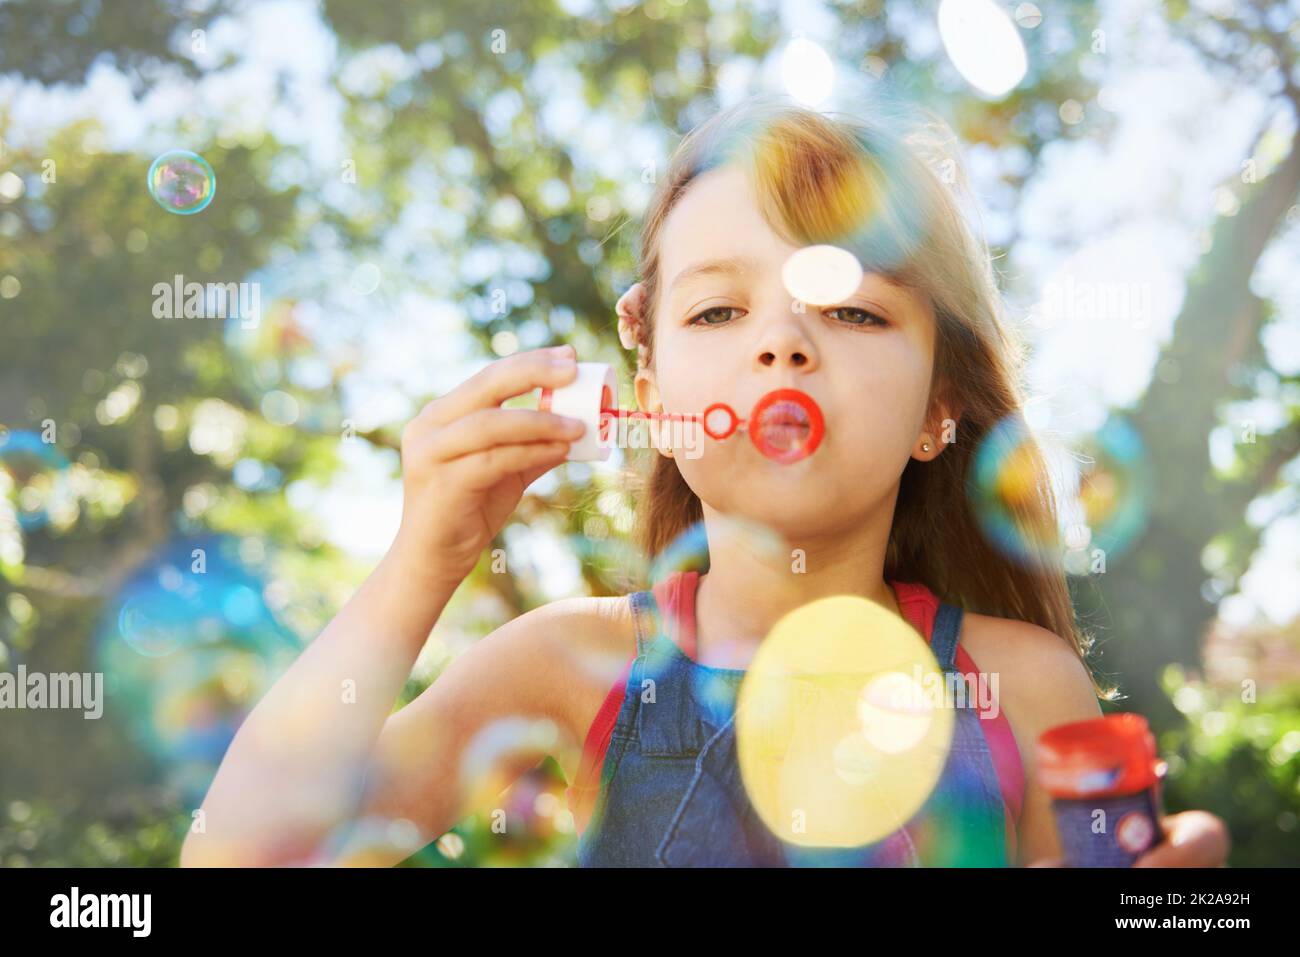 Bubbles and summer vacation. Shot of a cute young girl blowing bubbles outside. Stock Photo